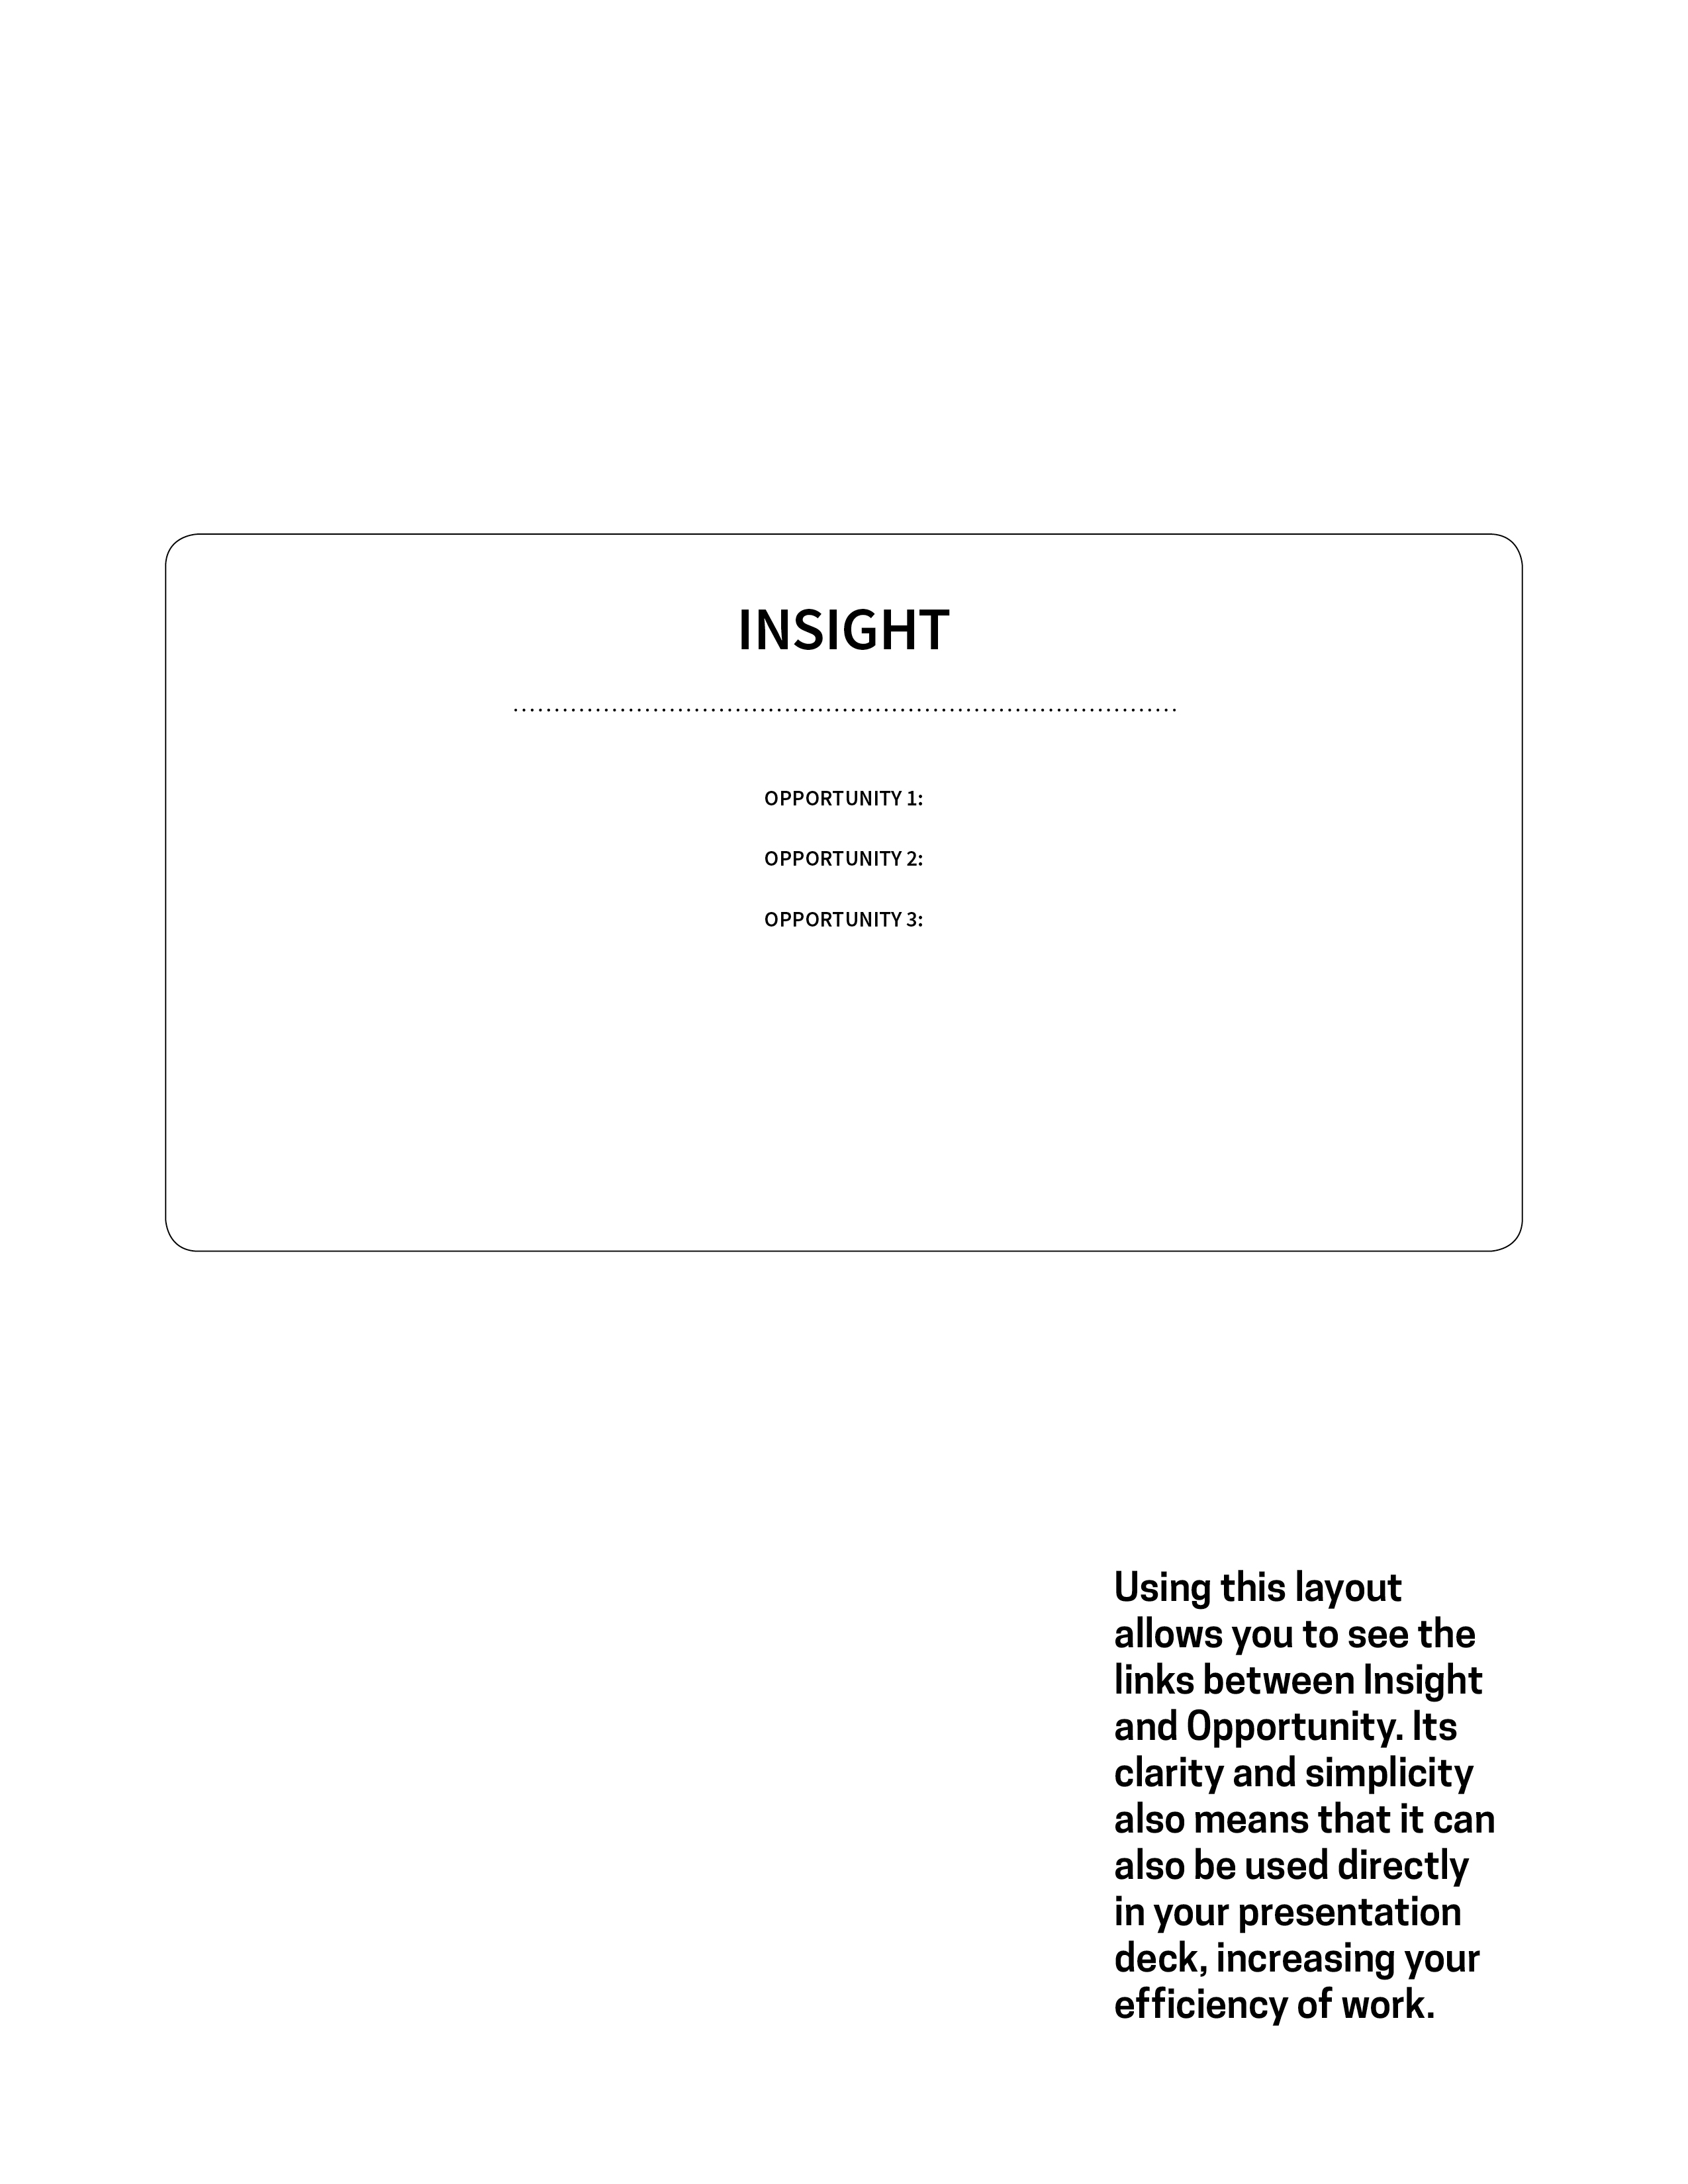 Diagrammatic illustration of finding opportunities. In-image caption reads: IUsing this layout allows you to see the links between Insight and Opportunity. Its clarity and simplicity also means that it can also be used directly in your presentation deck, increasing your efficiency of work.">